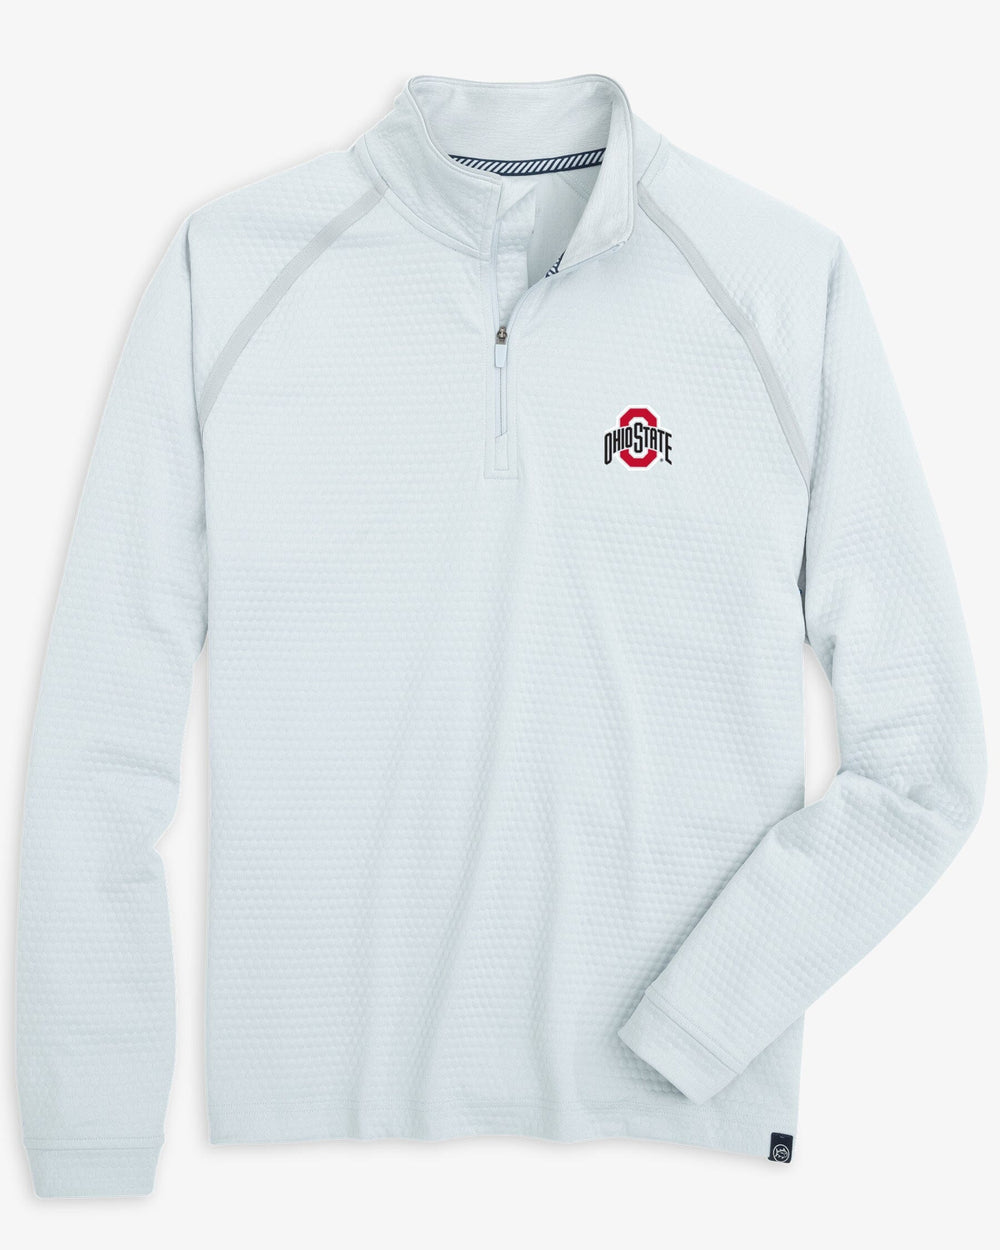 The front view of the Ohio State Buckeyes Scuttle Heather Quarter Zip by Southern Tide - Heather Slate Grey